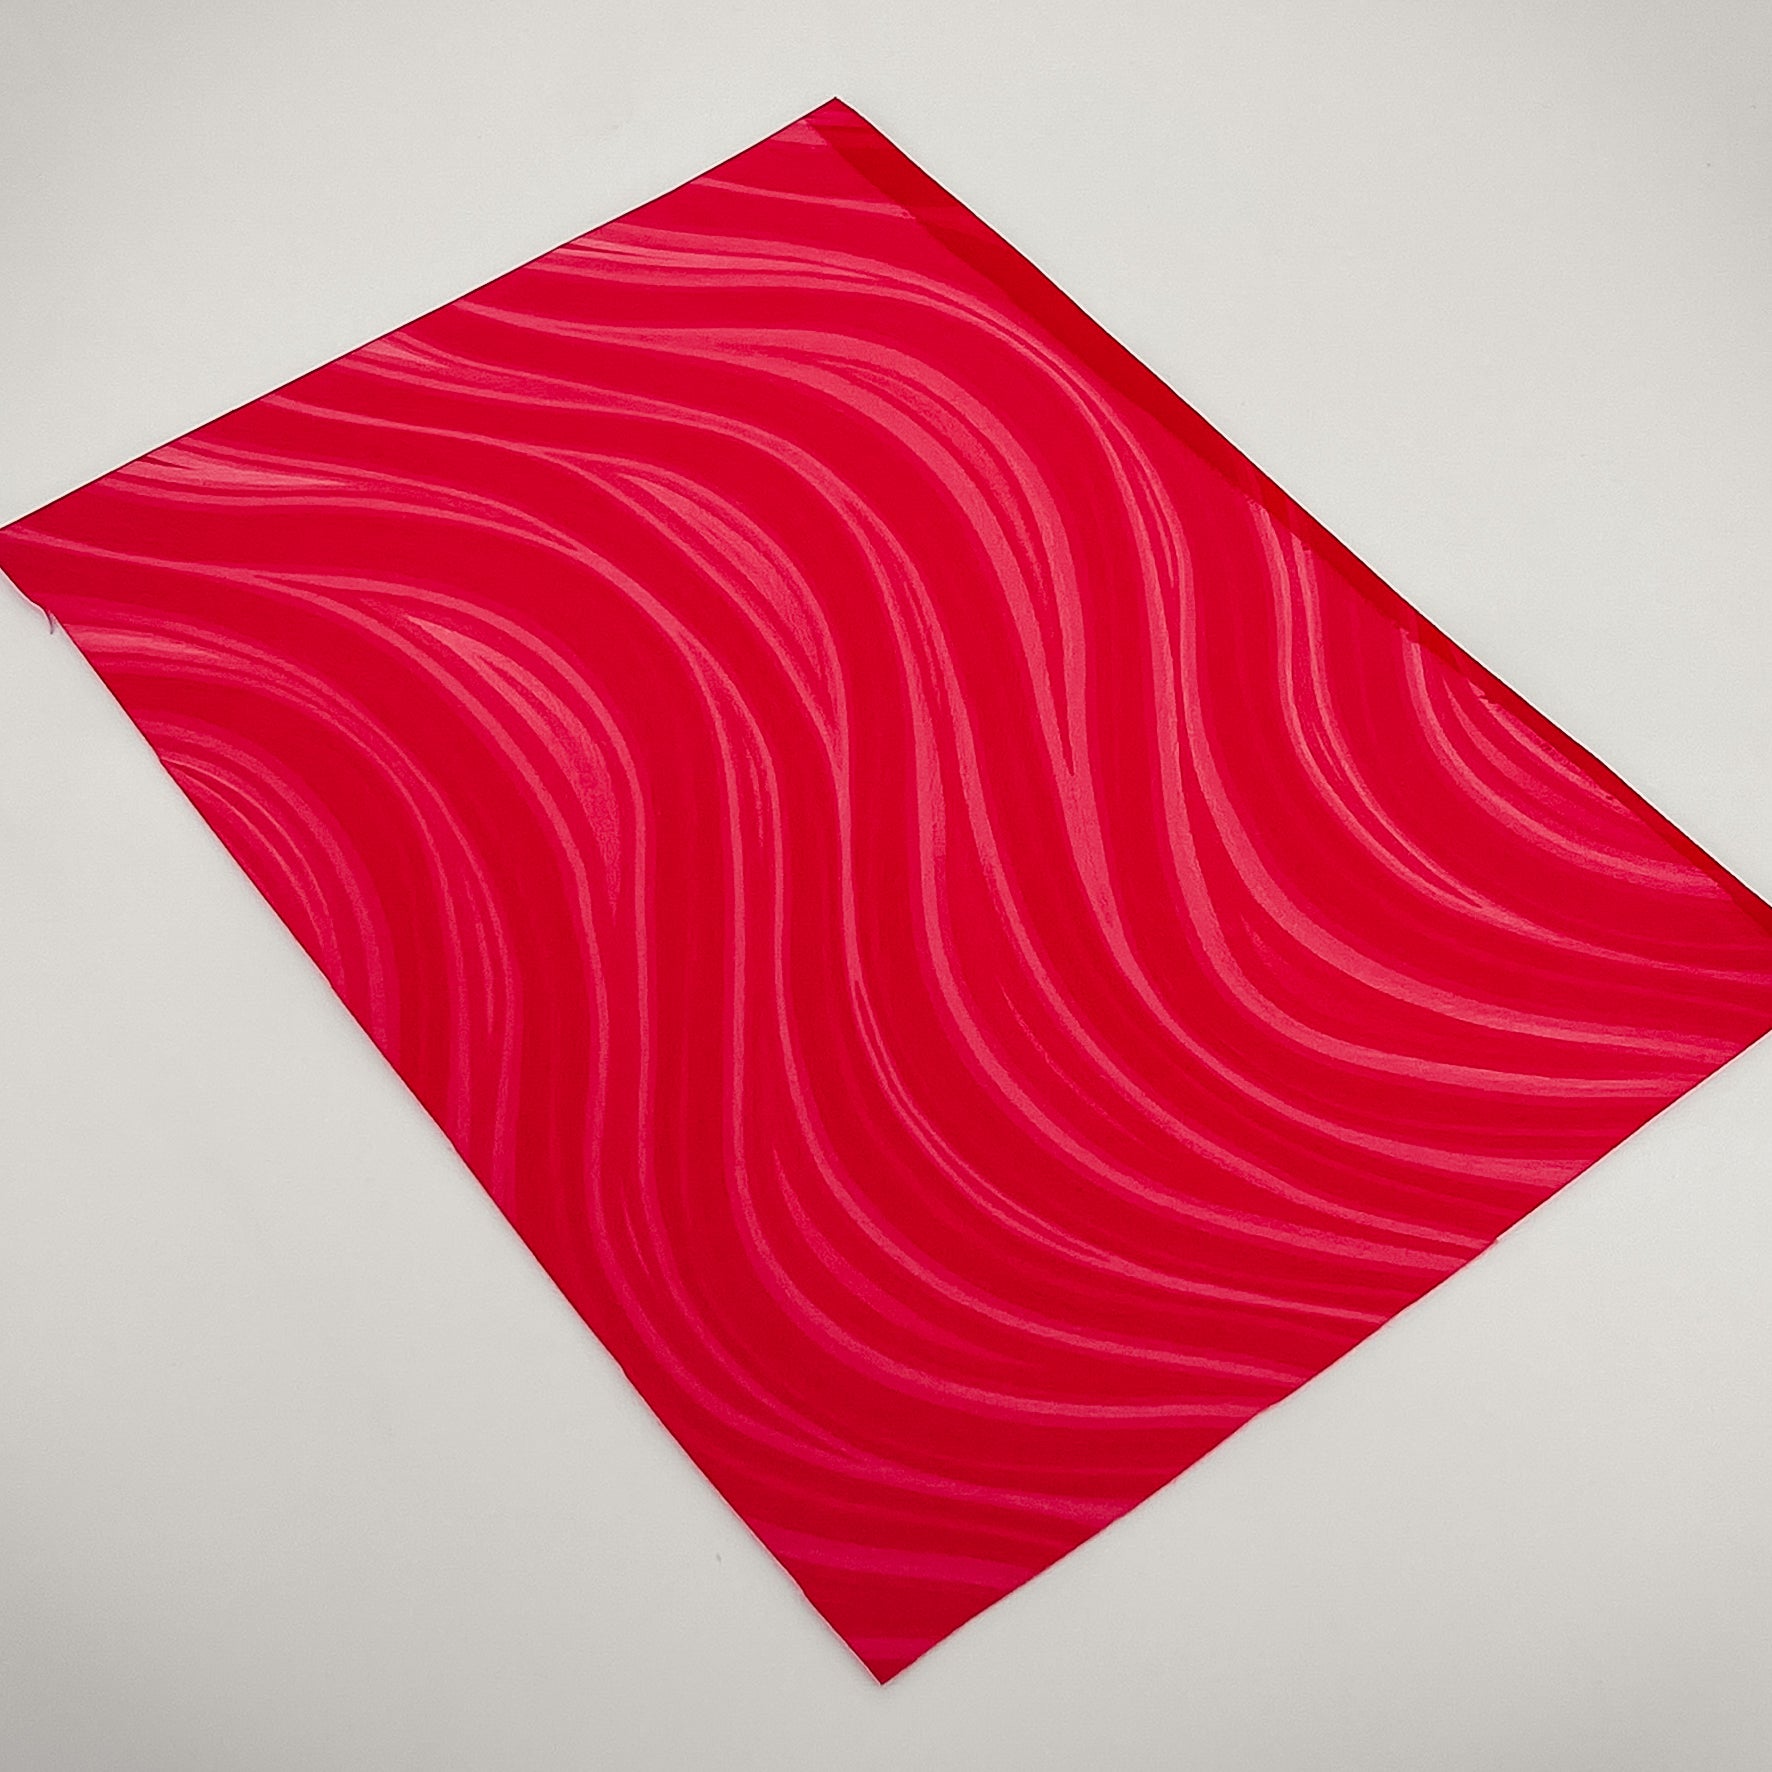 Iridescent Waves, Red